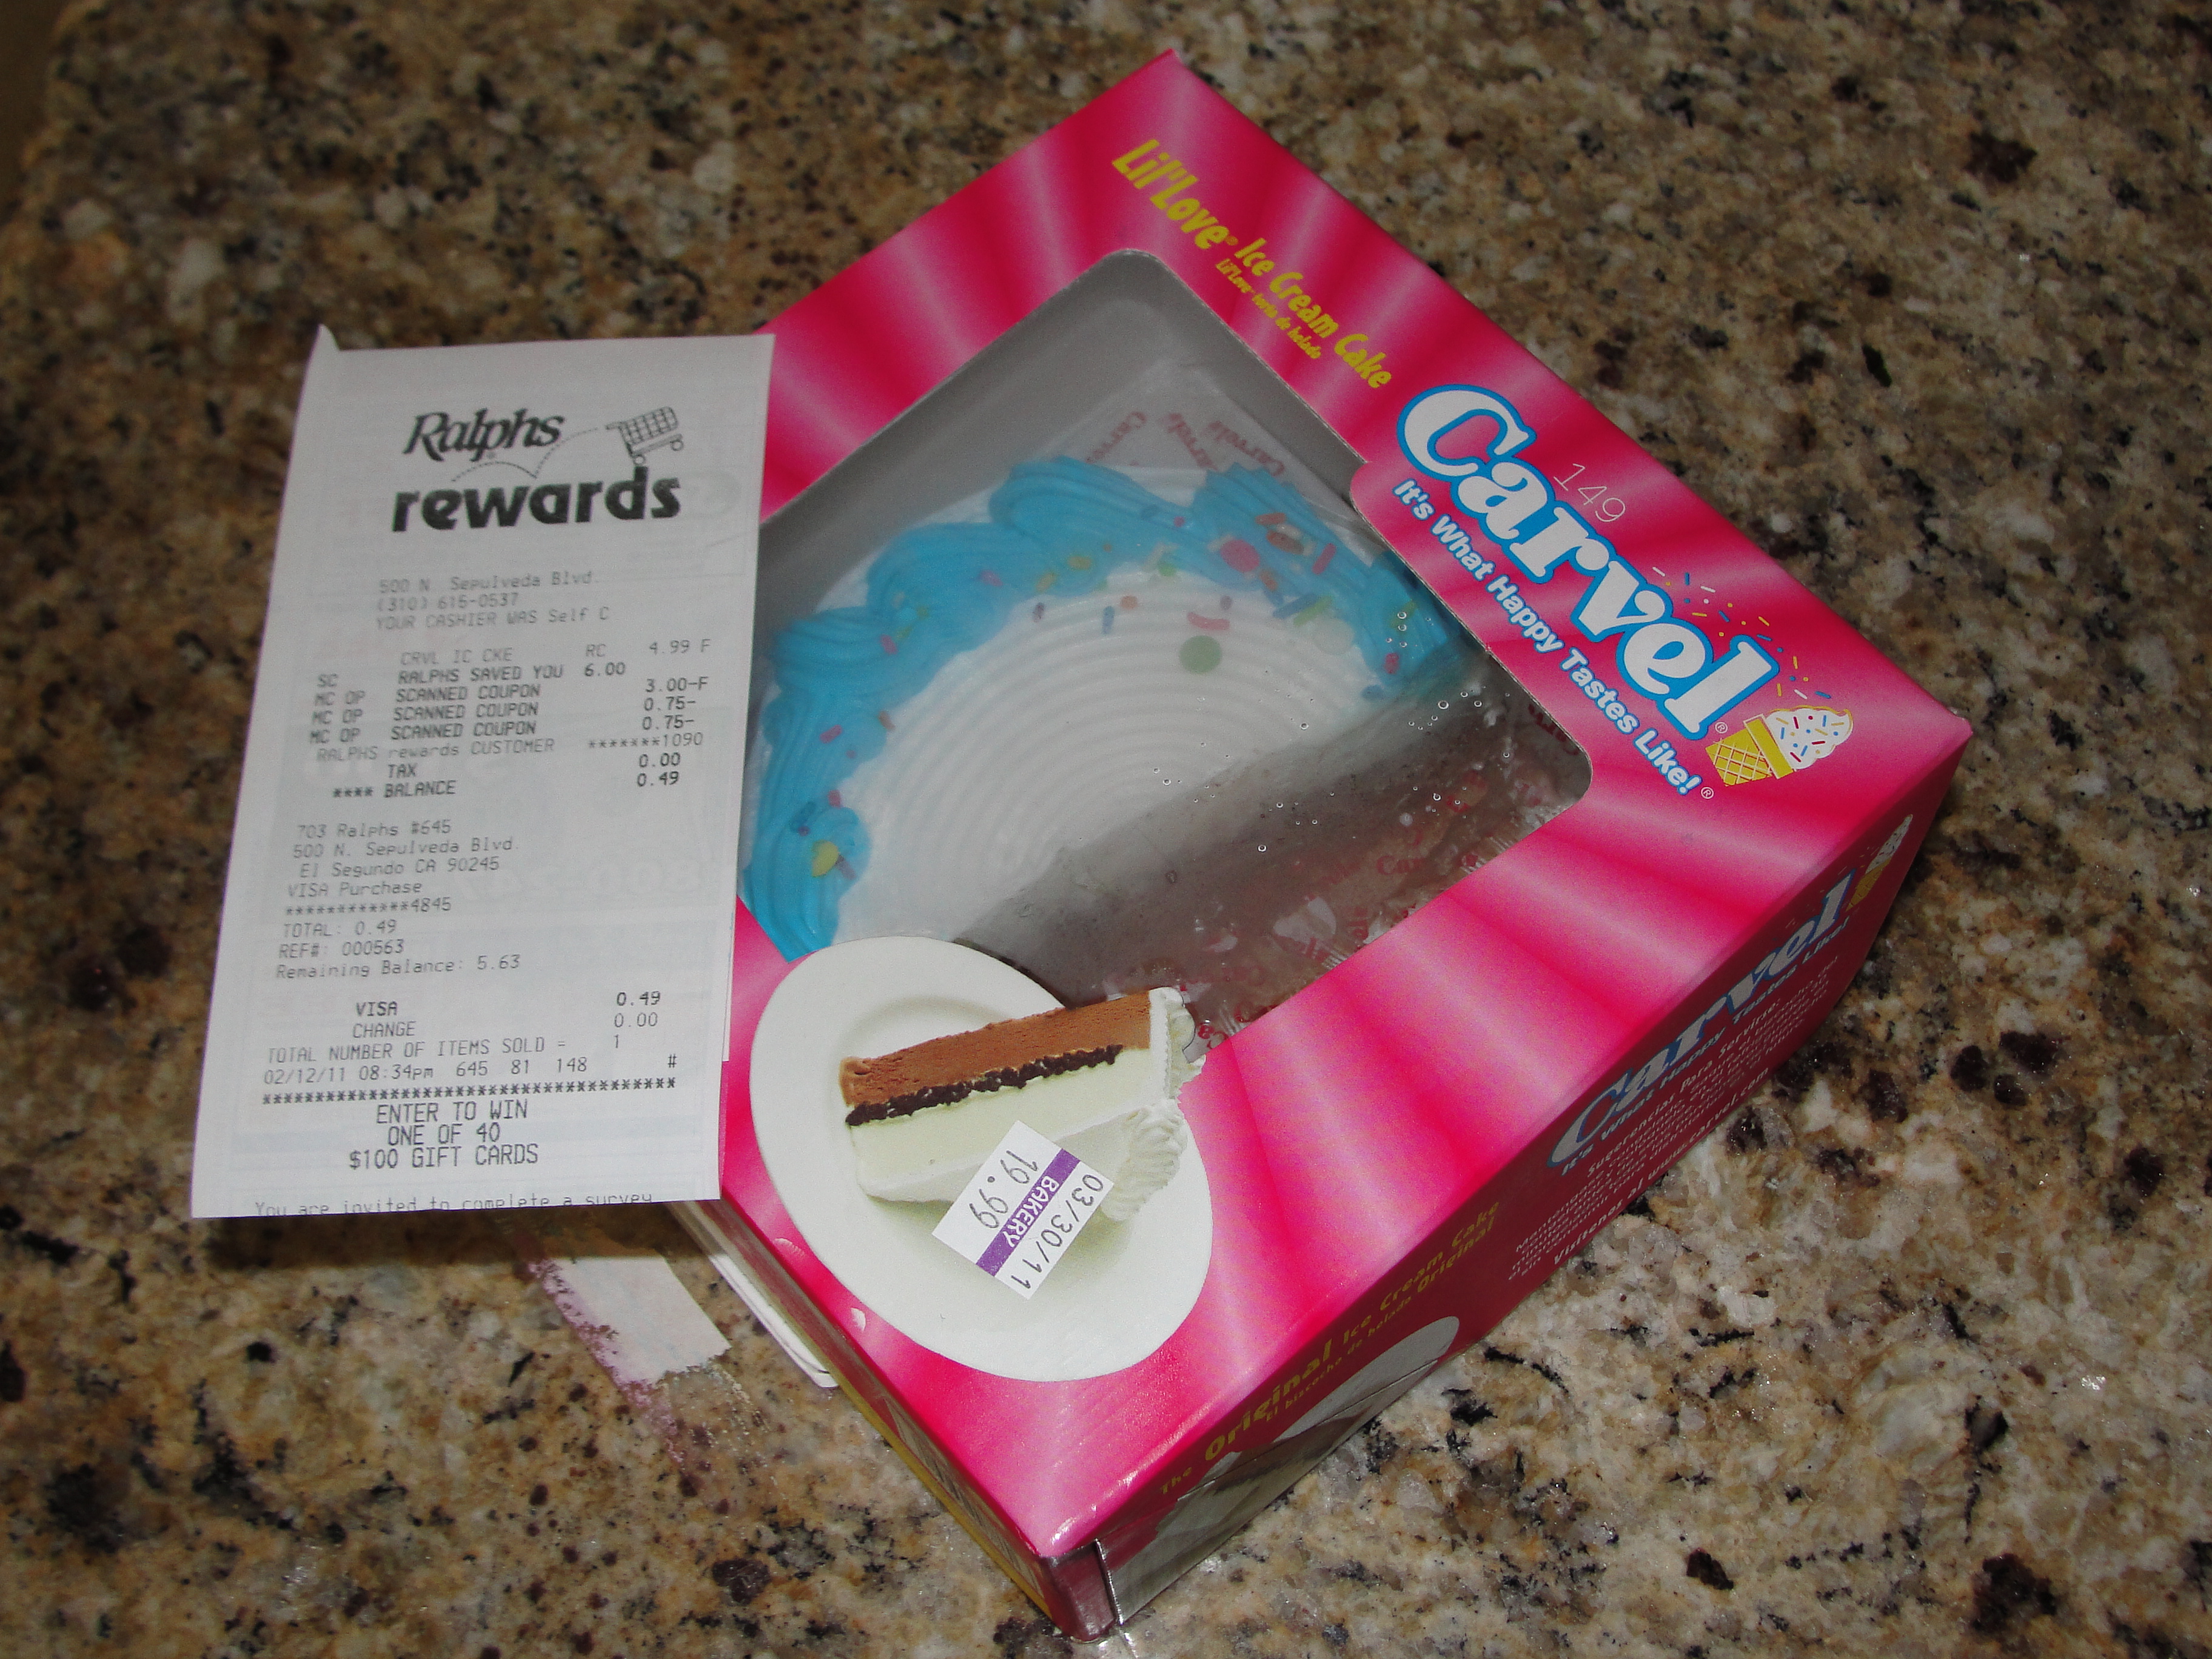 ice cream and cake games instaling